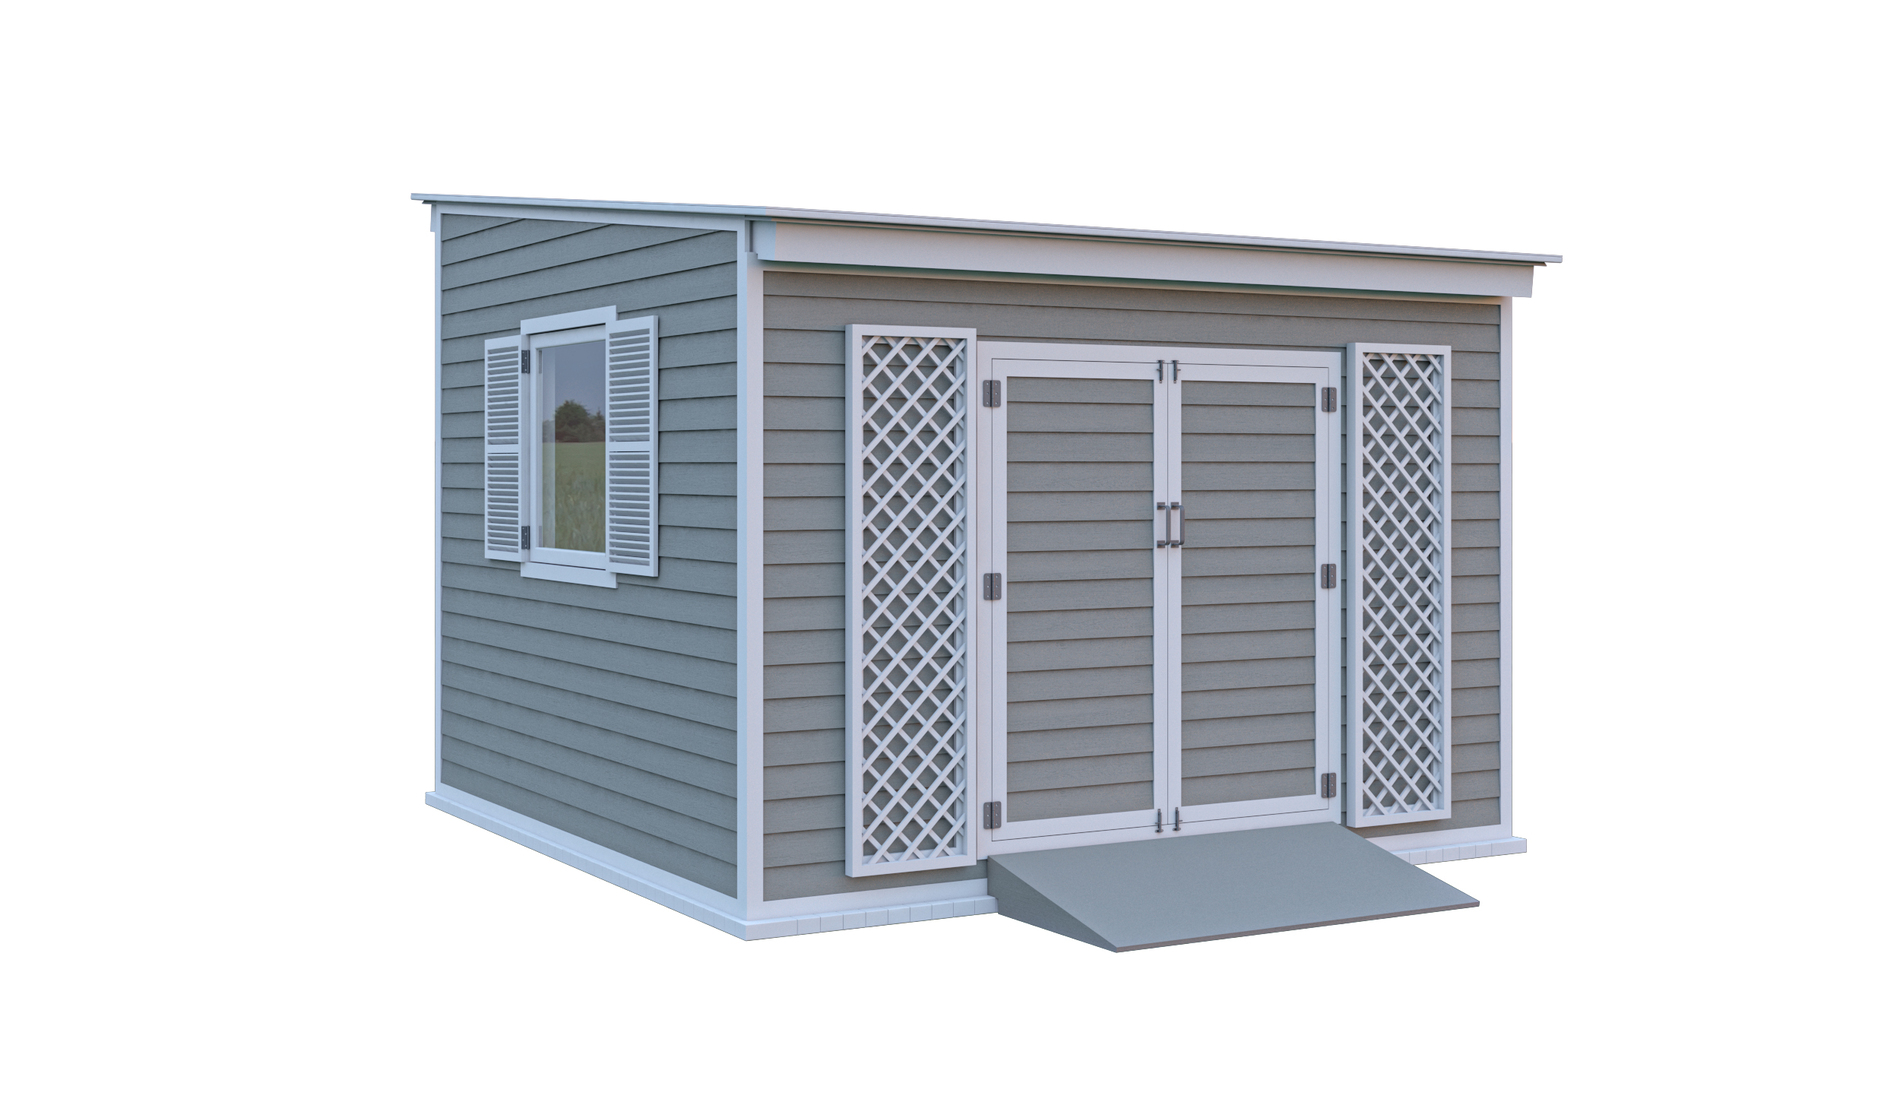 12x12 lean to garden shed